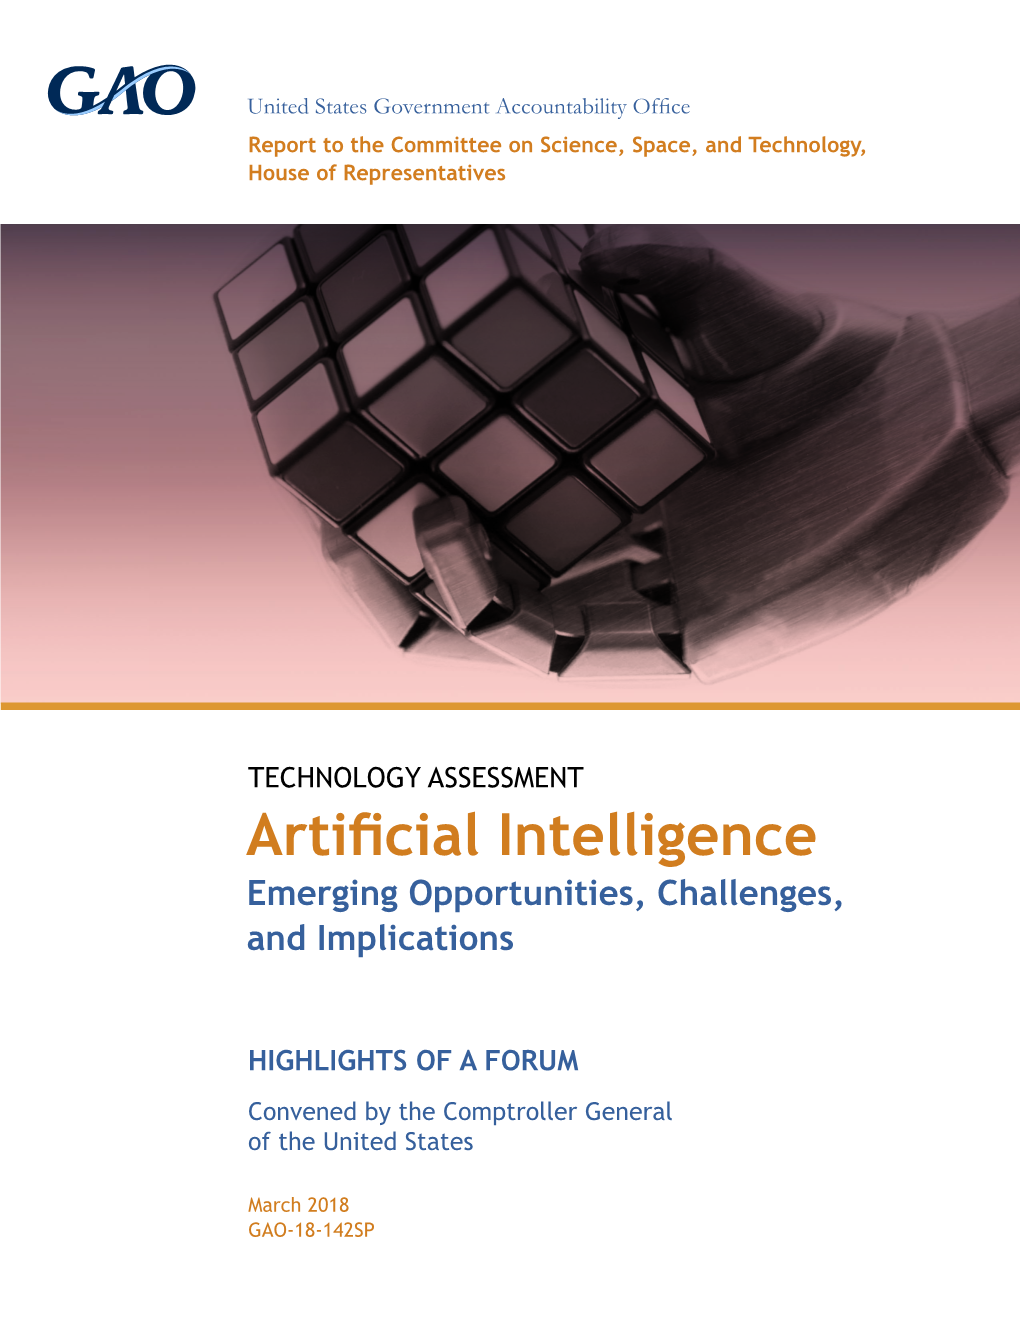 Gao-18-142Sp, Artificial Intelligence